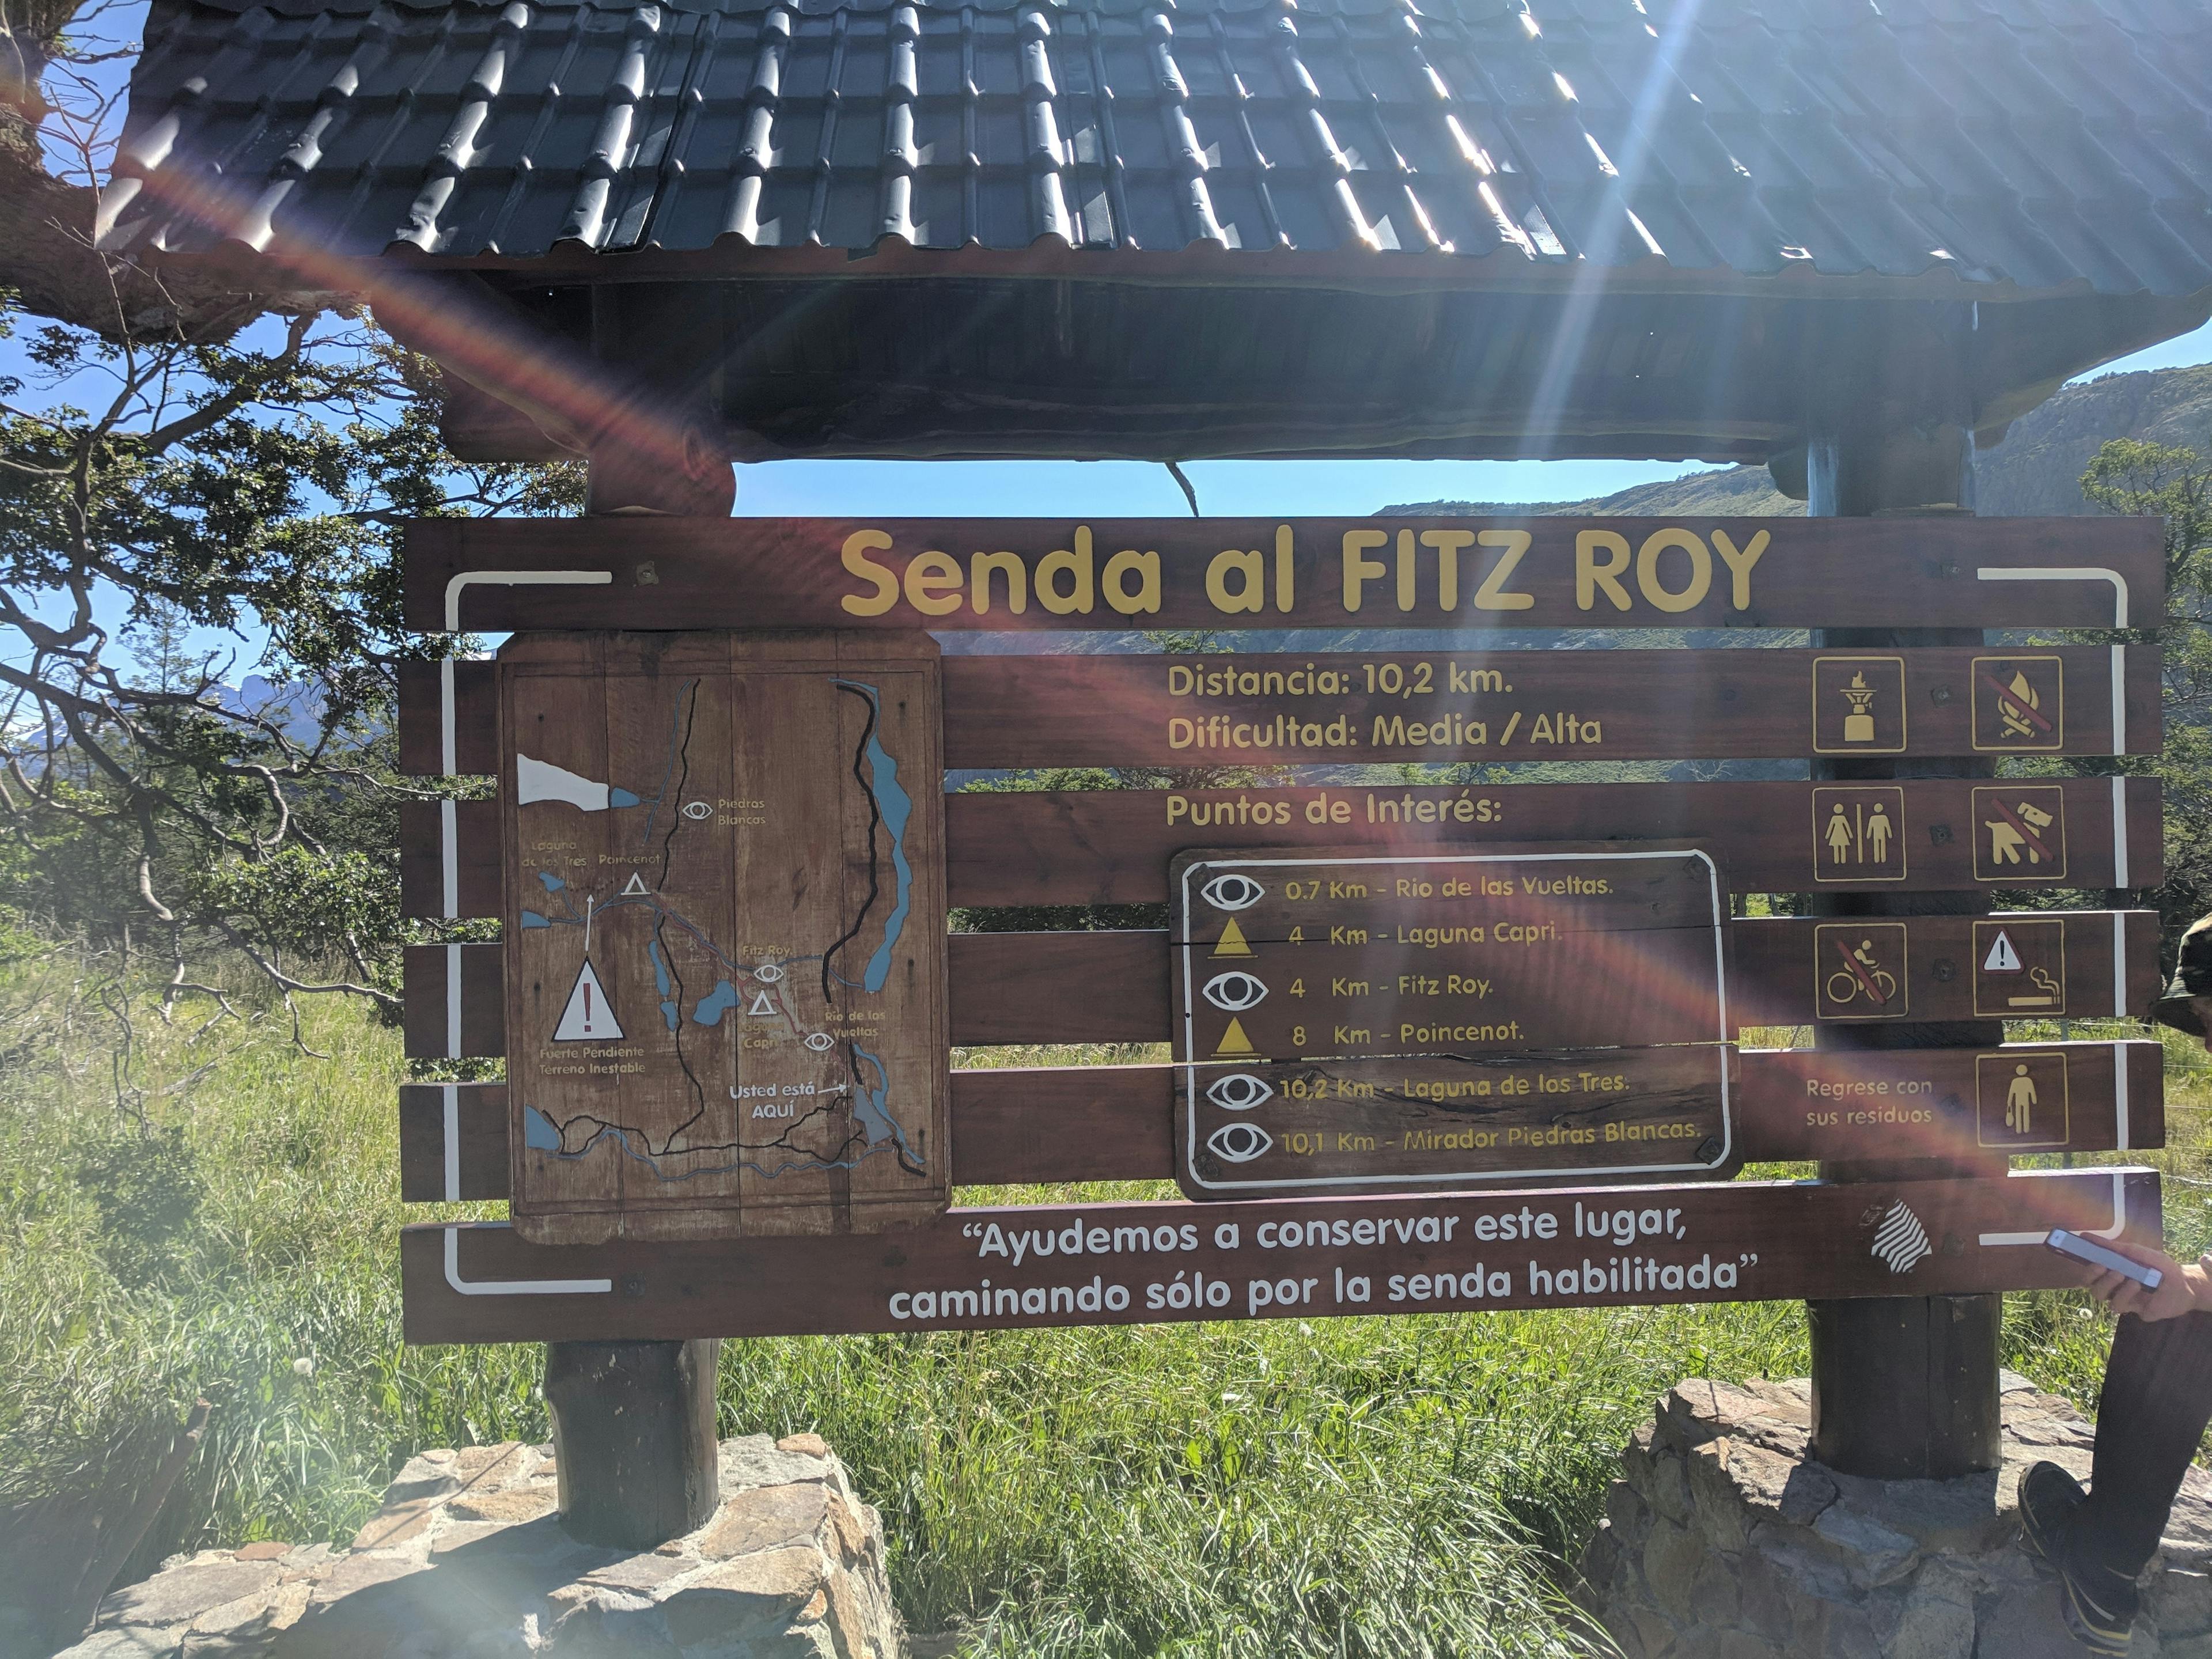 A map of the trails around Fitz Roy